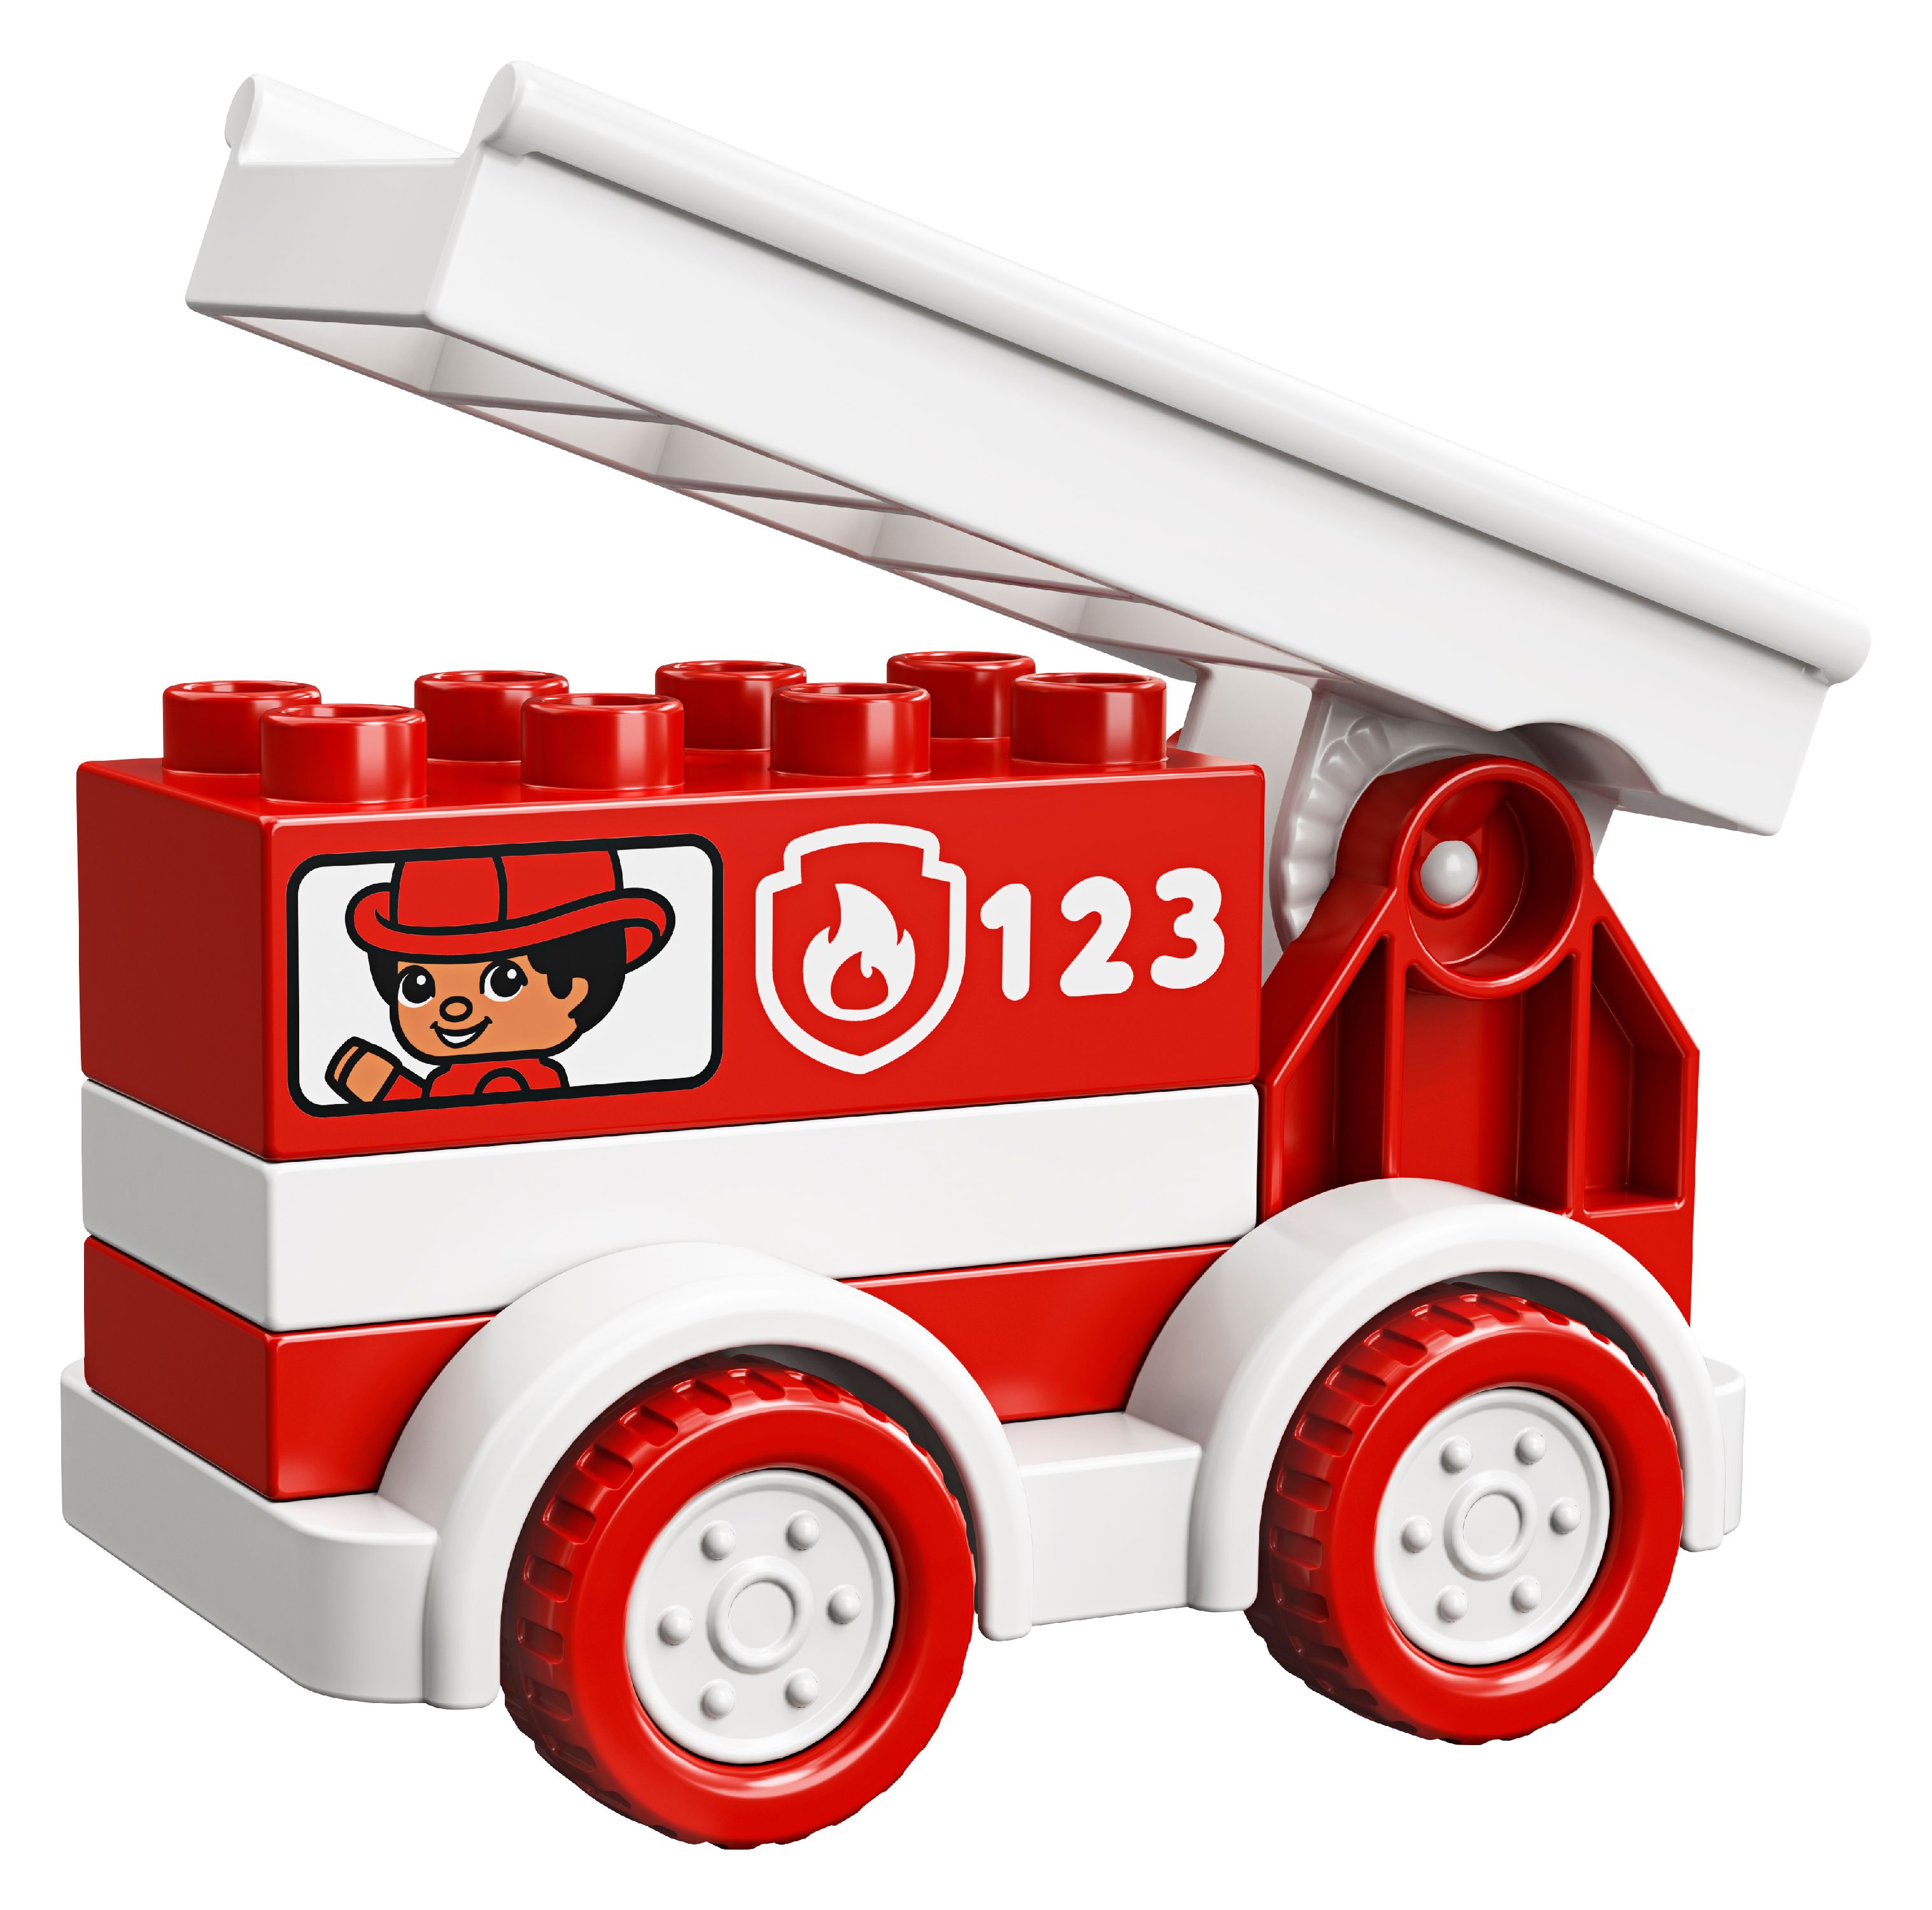 LEGO DUPLO My First Fire Truck 10917 Educational Building Toy for Toddlers (6 Pieces) - image 2 of 6